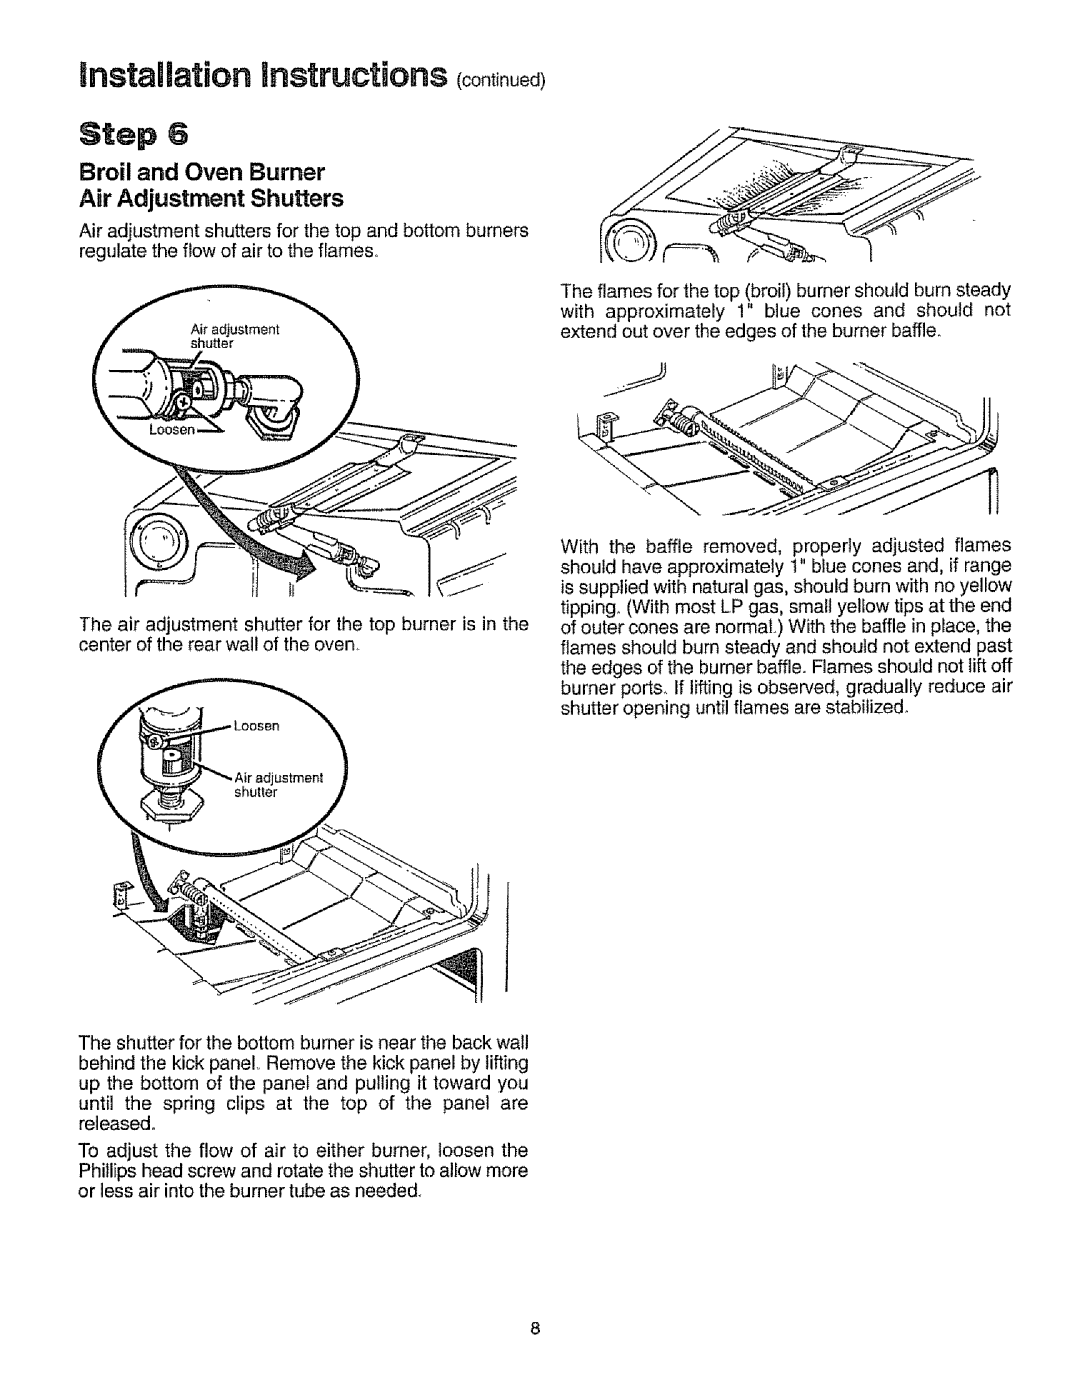 Sears 73321, 73328, 73318, 73311 installation instructions coot ued, Step, Air Adjustment Shutters, Broil and Oven Burner 